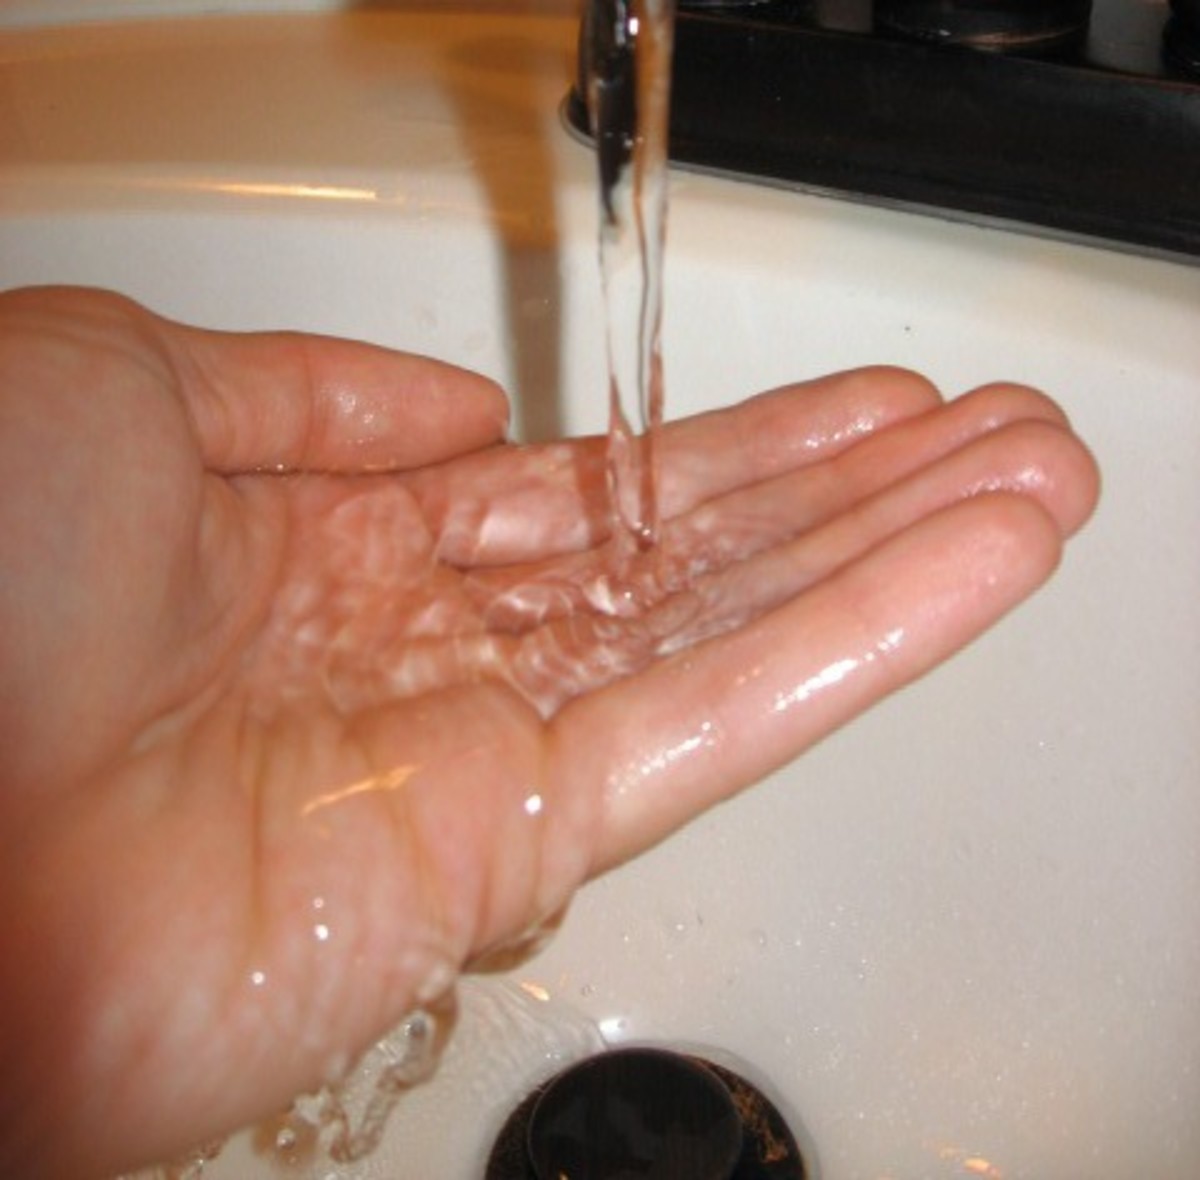 Wash your hands with soap and warm water for 30 seconds